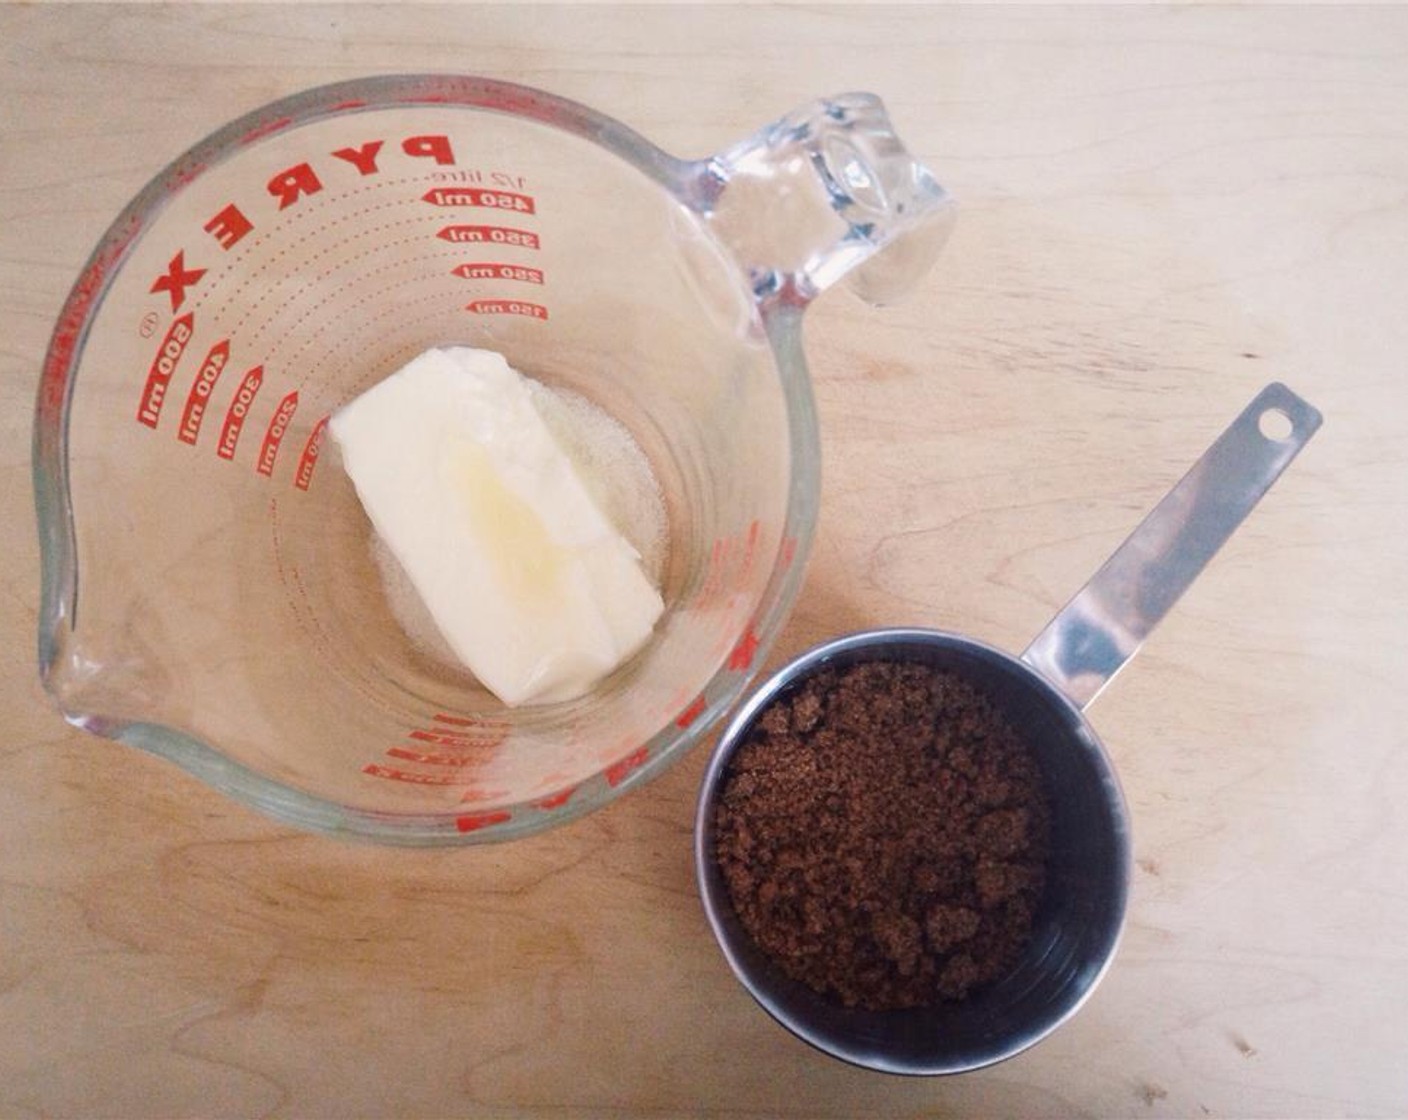 step 2 Combine Butter (1/4 cup) and Brown Sugar (1/4 cup) into a large mixing bowl and mix until combined.